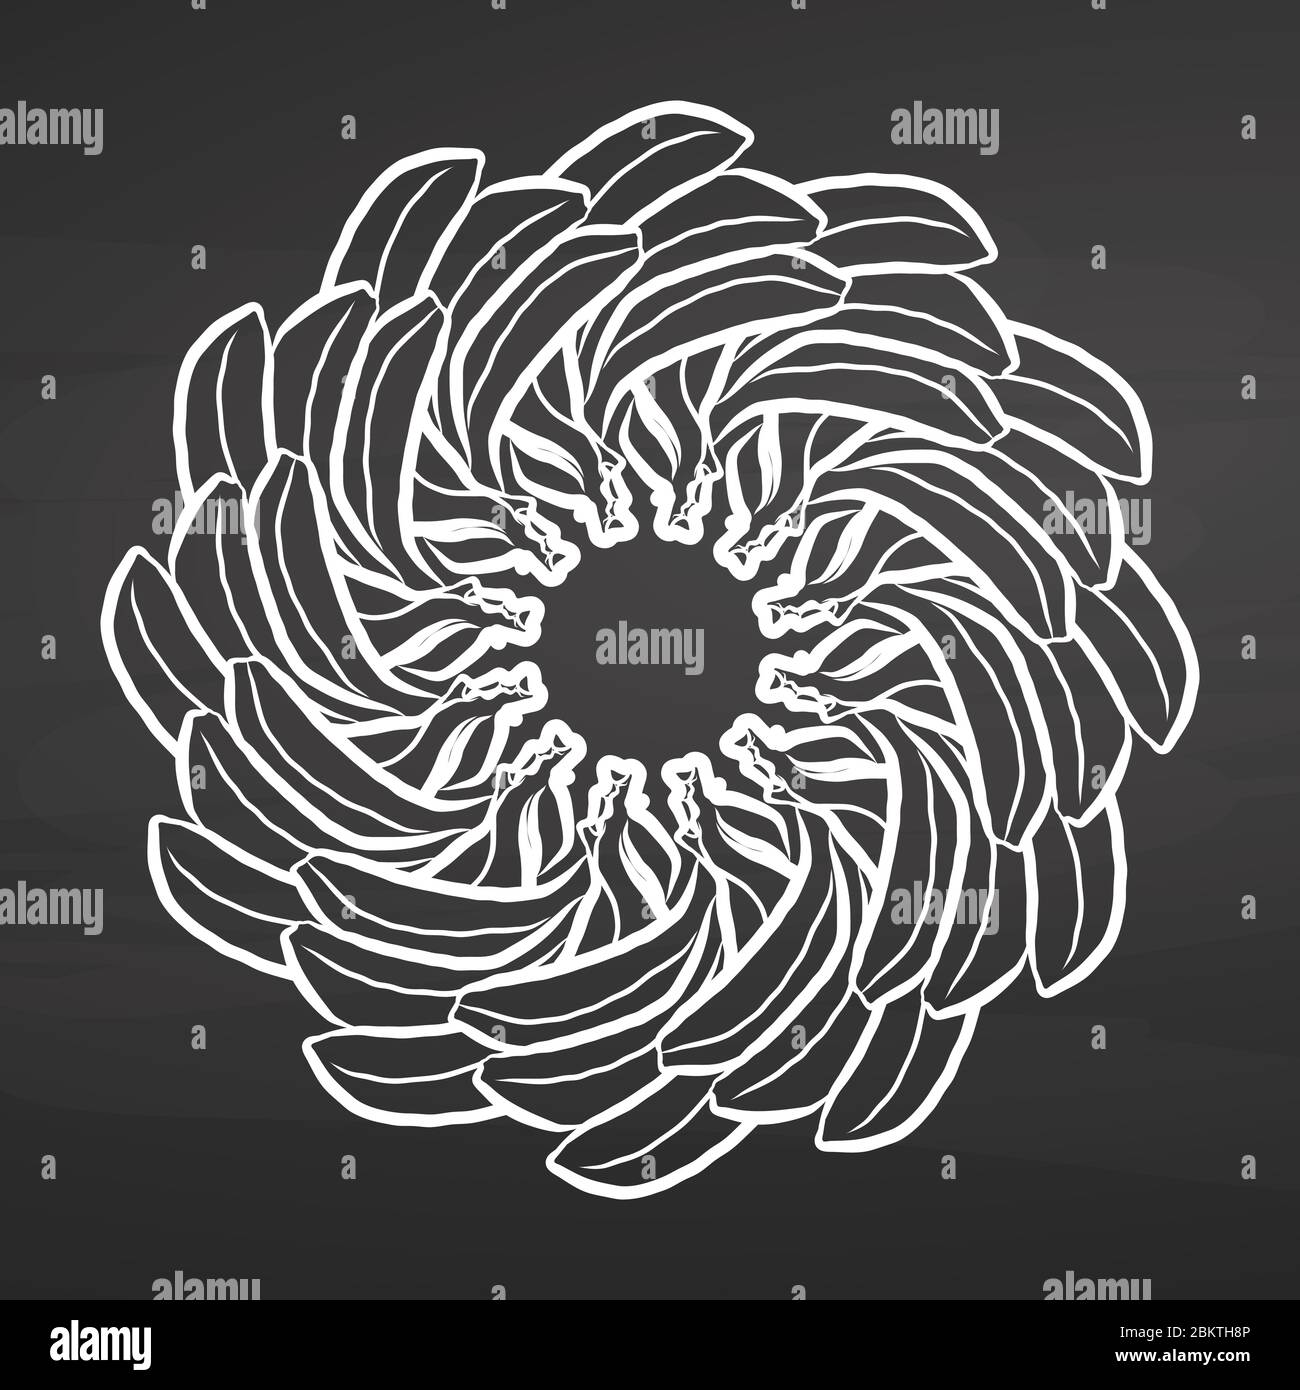 Chalk sketch of bananas arranged in a circle. Seamless round composition with hand drawn fruits. Vector illustration on chalkboard. Stock Vector